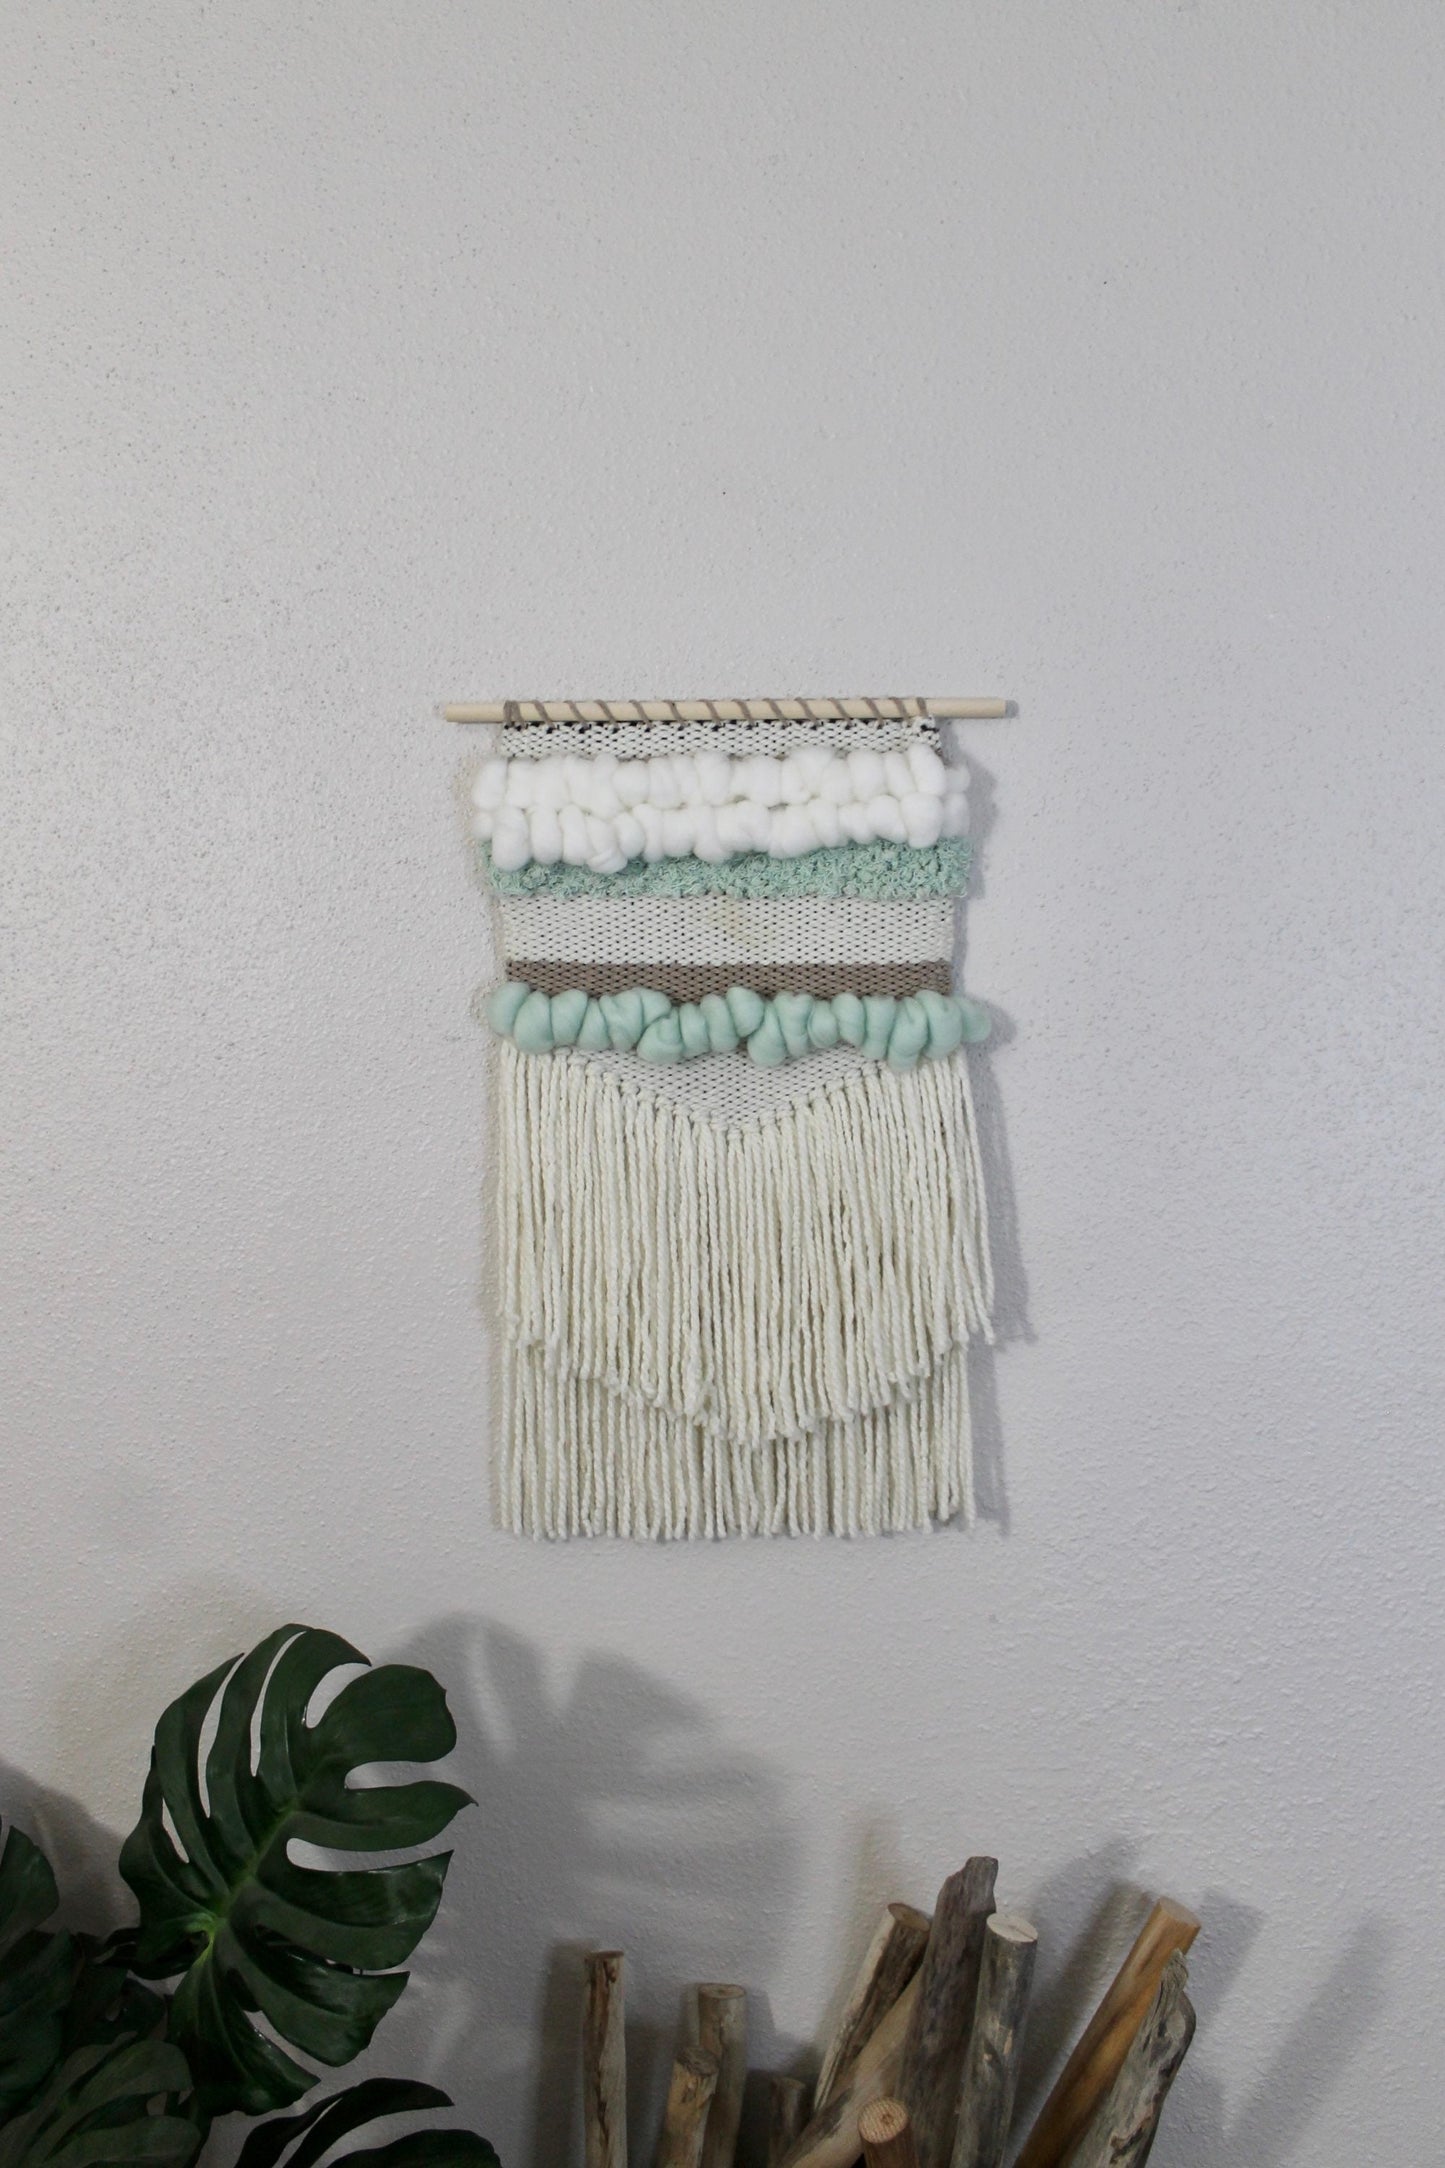 Woven wall hanging | wall art | weaving | woven tapestry | wall decor | wall tapestry | home decor